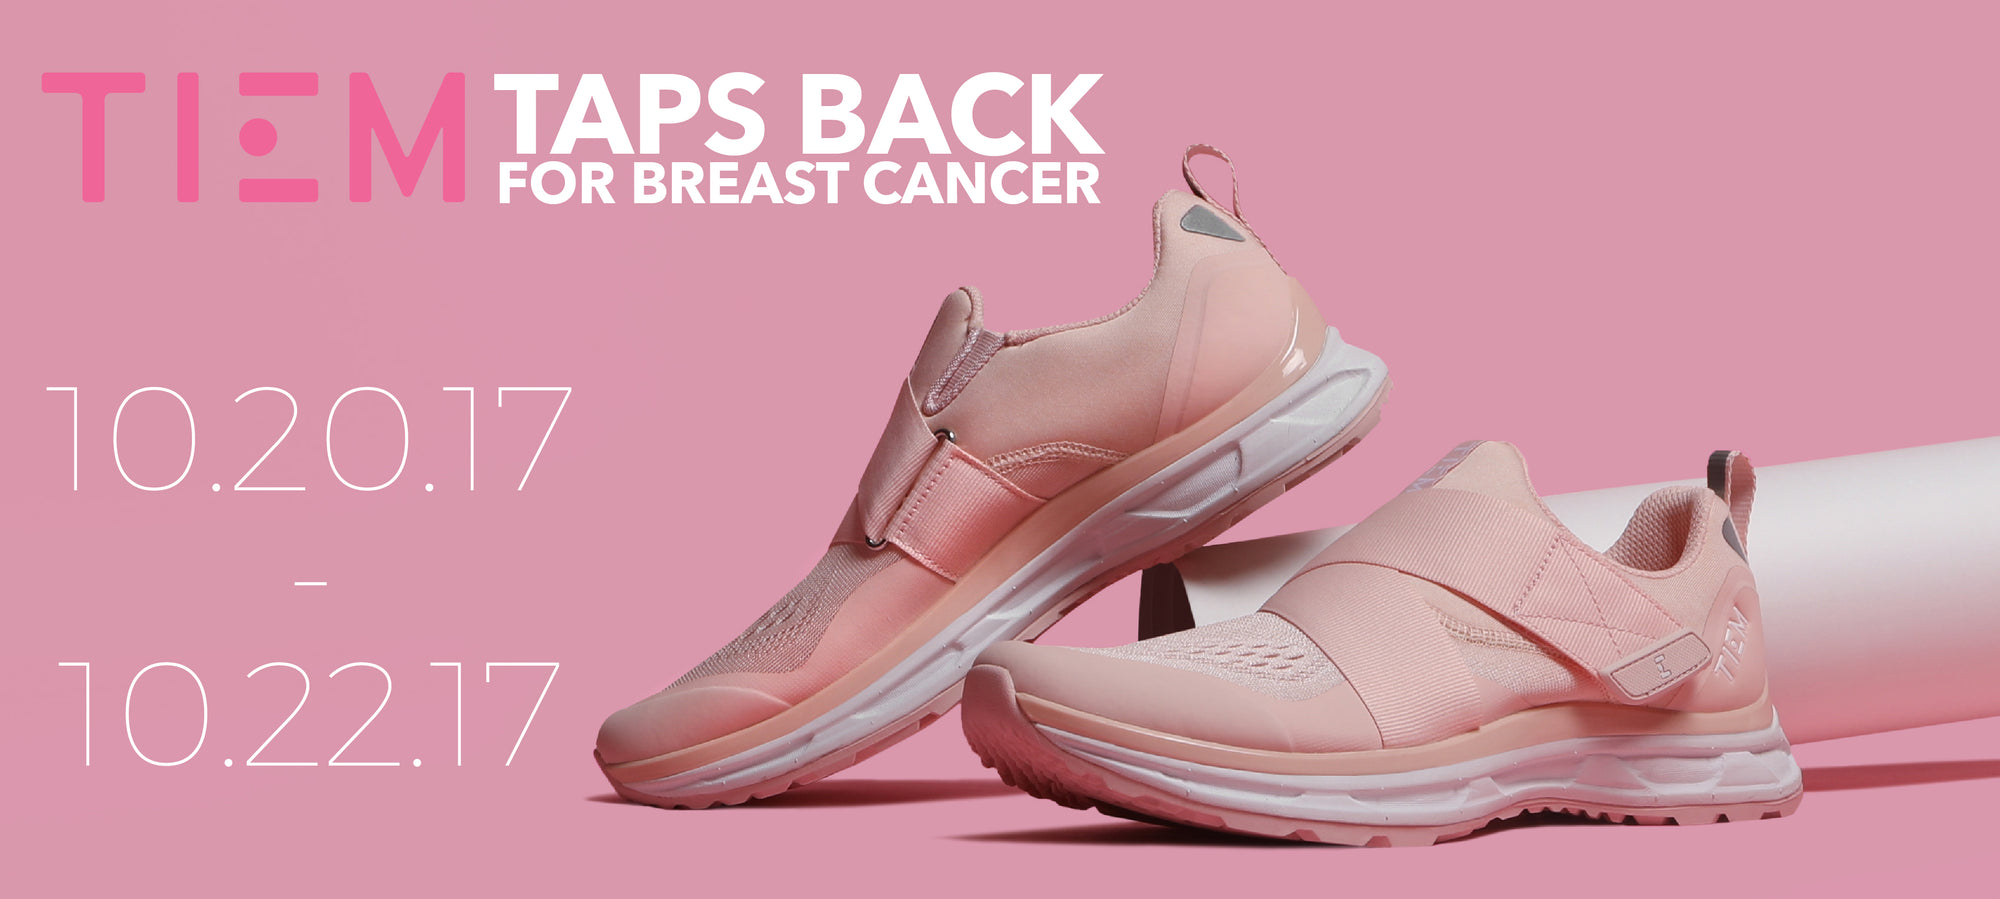 TIEM Taps Back for Breast Cancer